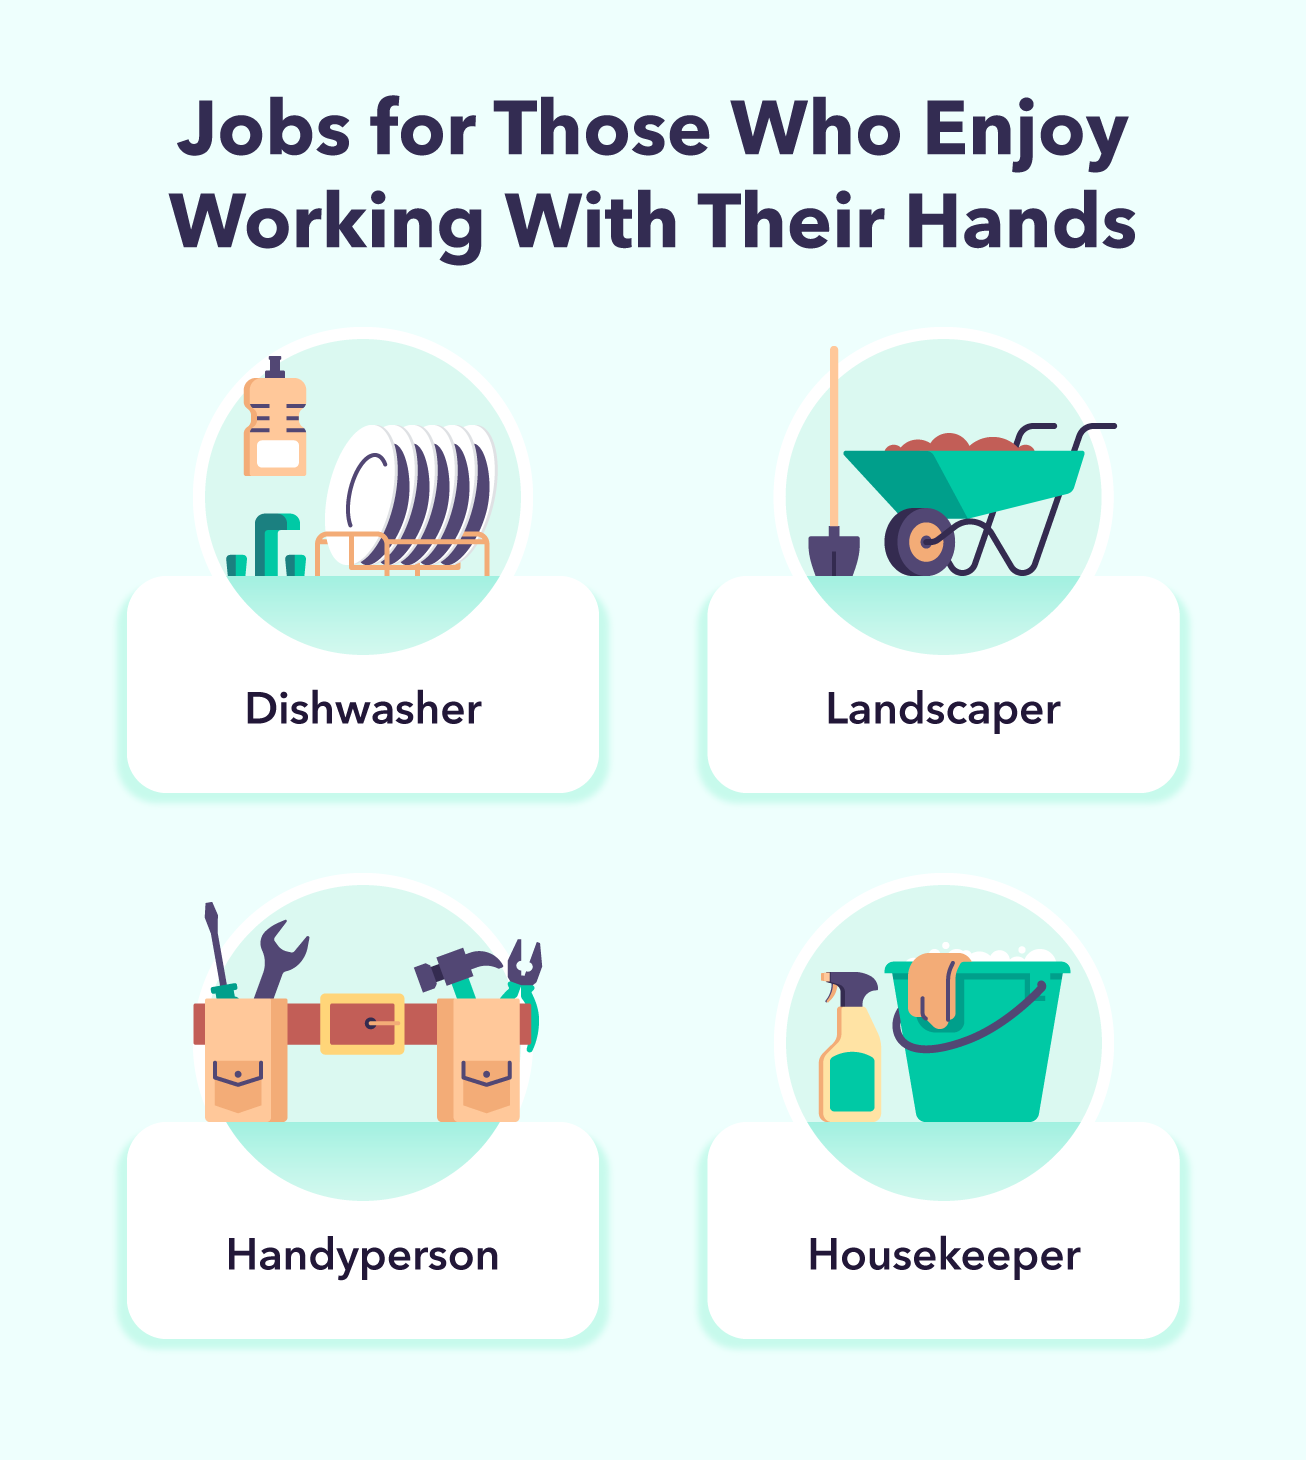 A graphic lists 4 summer job ideas for those who enjoy working with their hands.